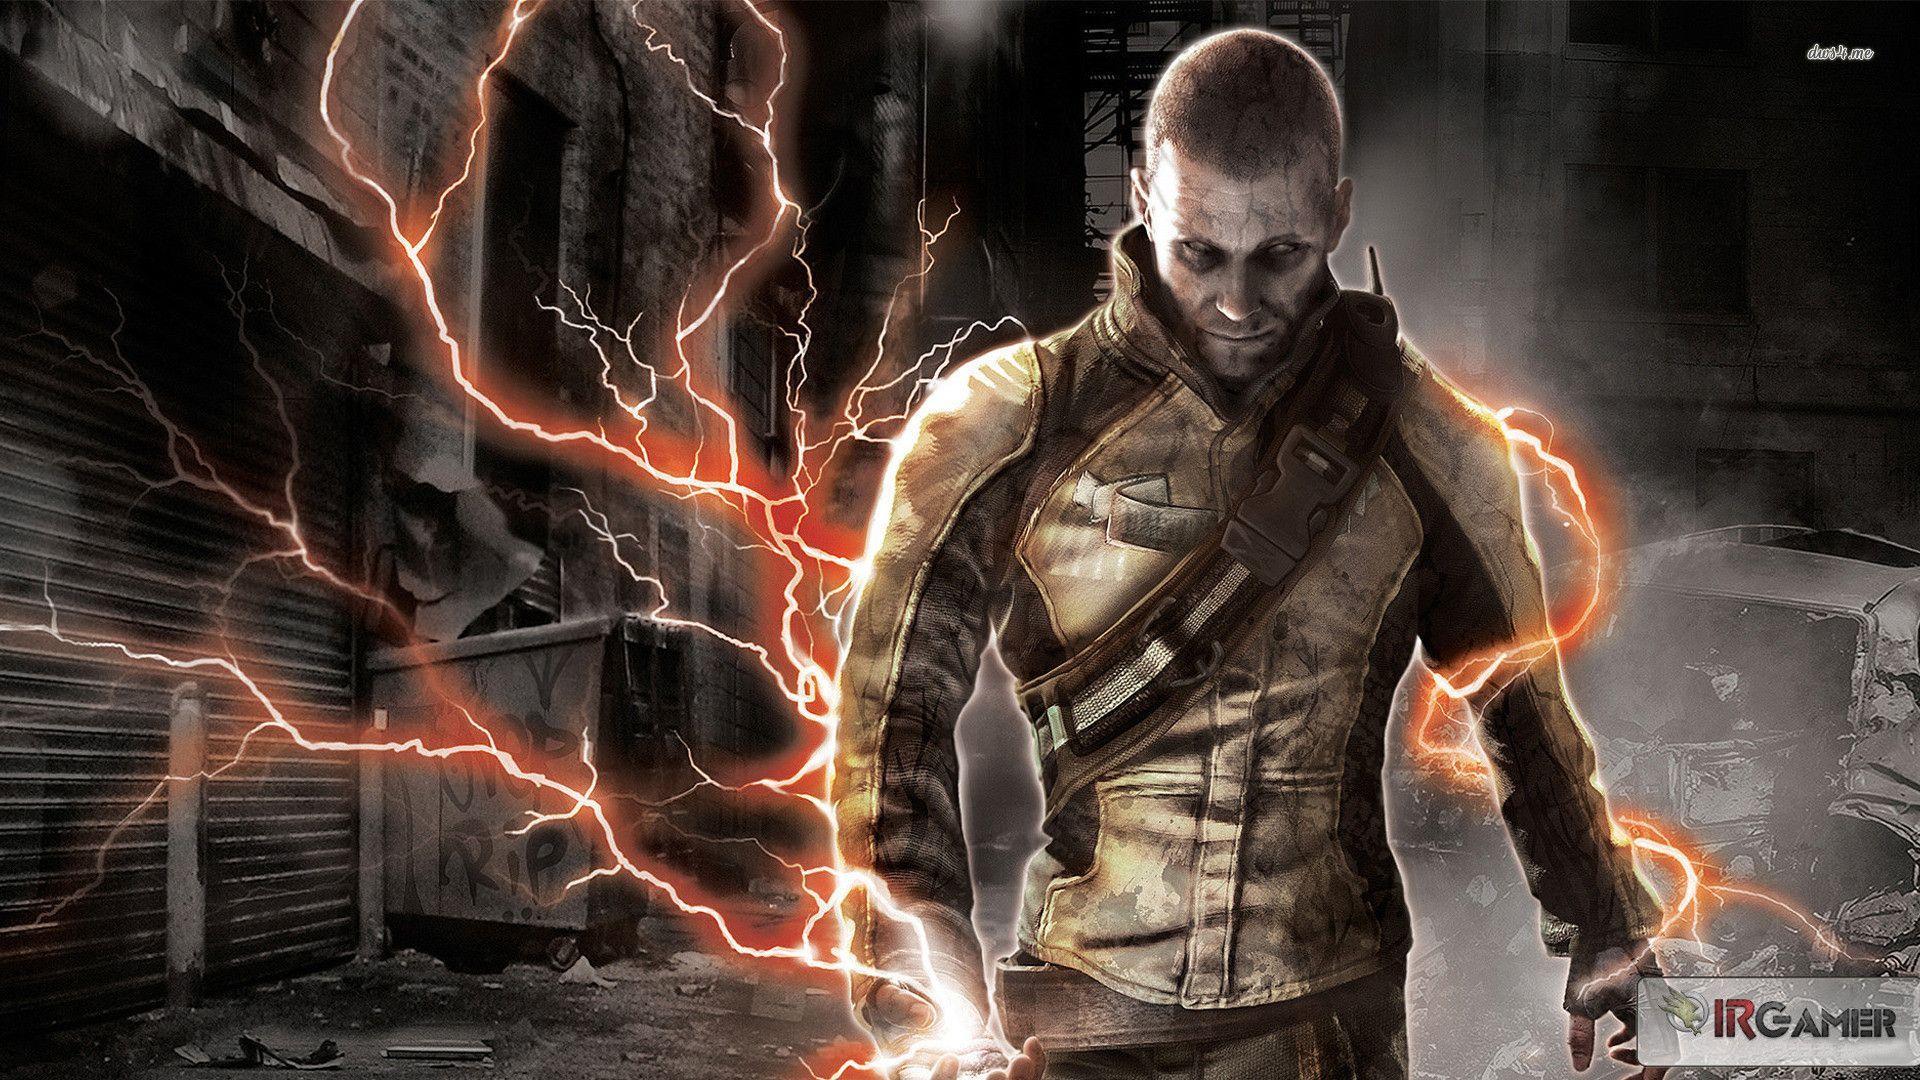 2347 Infamous 2 1920x1080 Game